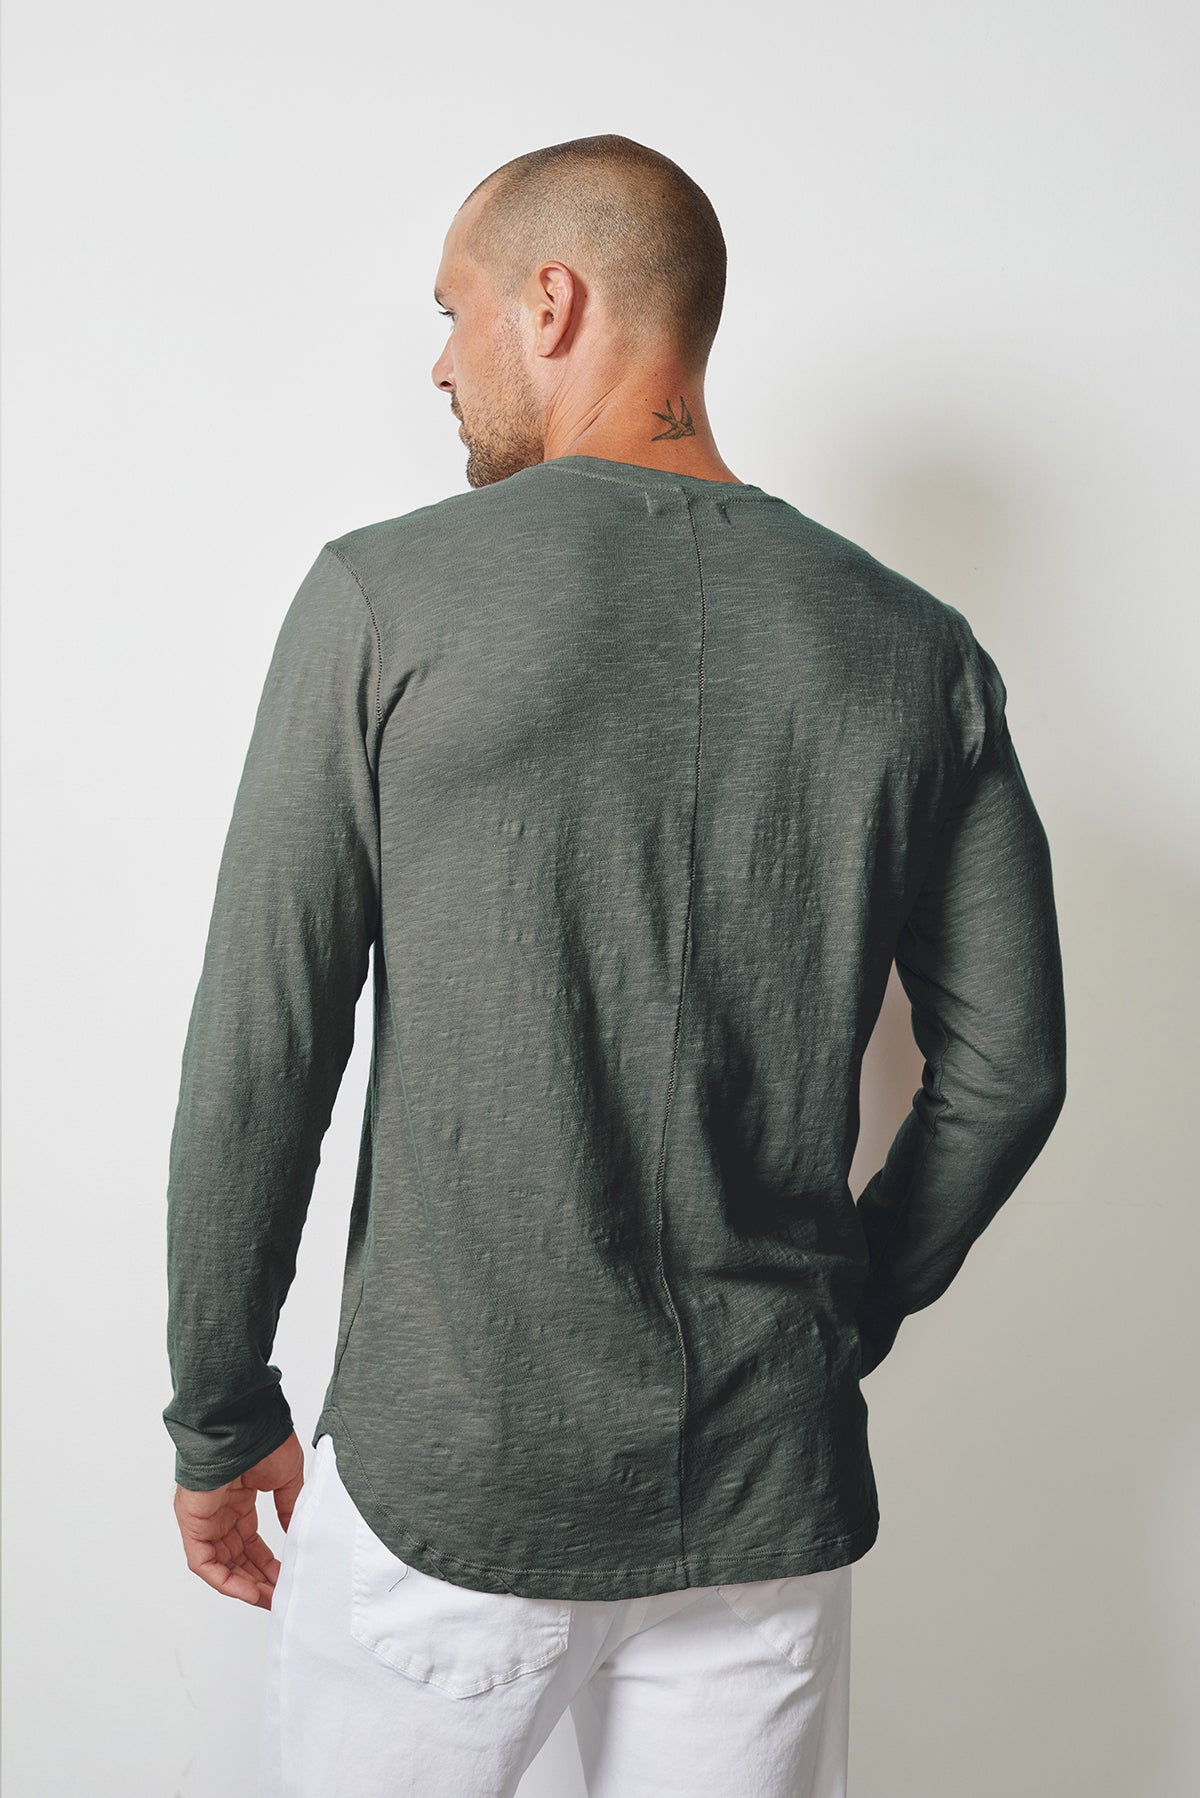   The back view of a man wearing a Velvet by Graham & Spencer CHANCE CREW NECK TEE. 